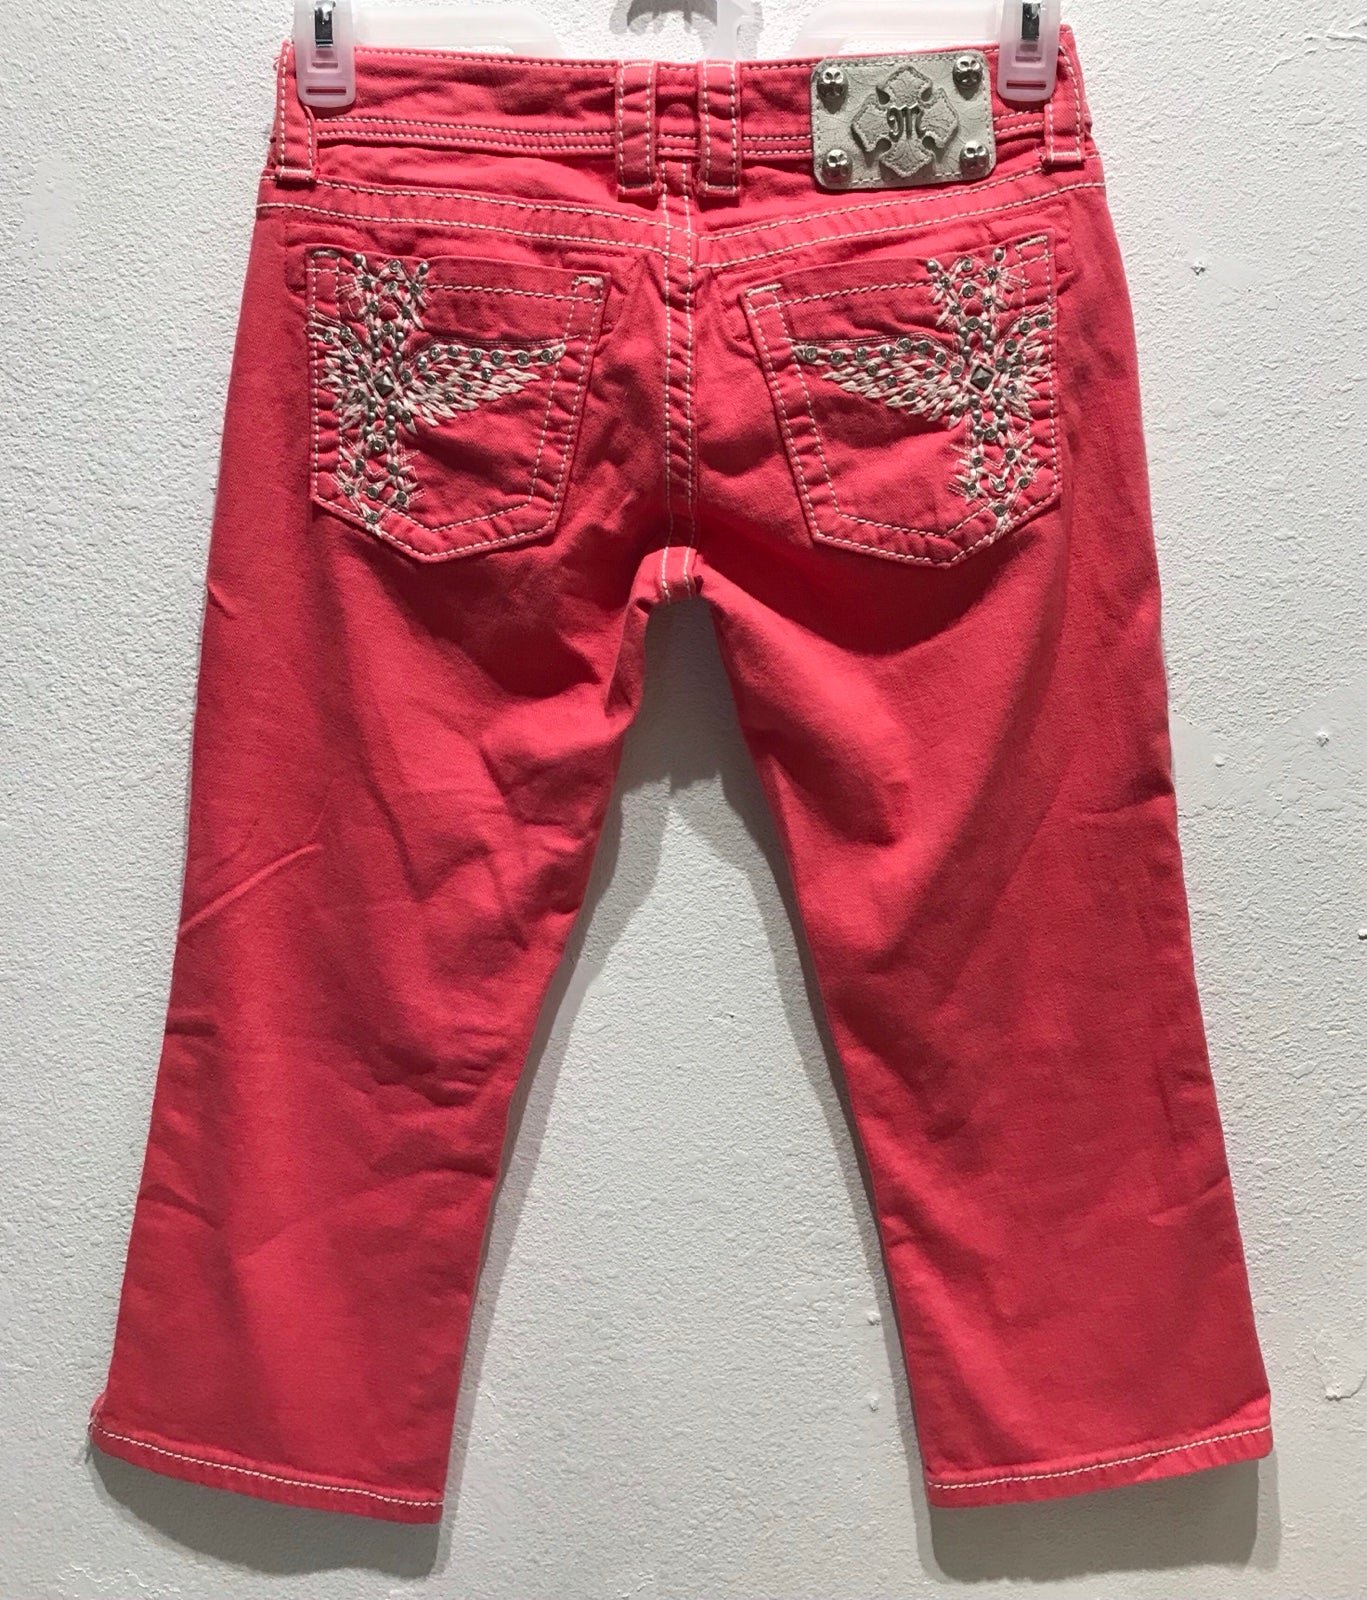 Beautiful Woman’s Miss Me Pink Blinged Out Capri Jeans pPp3JxH2L Discount